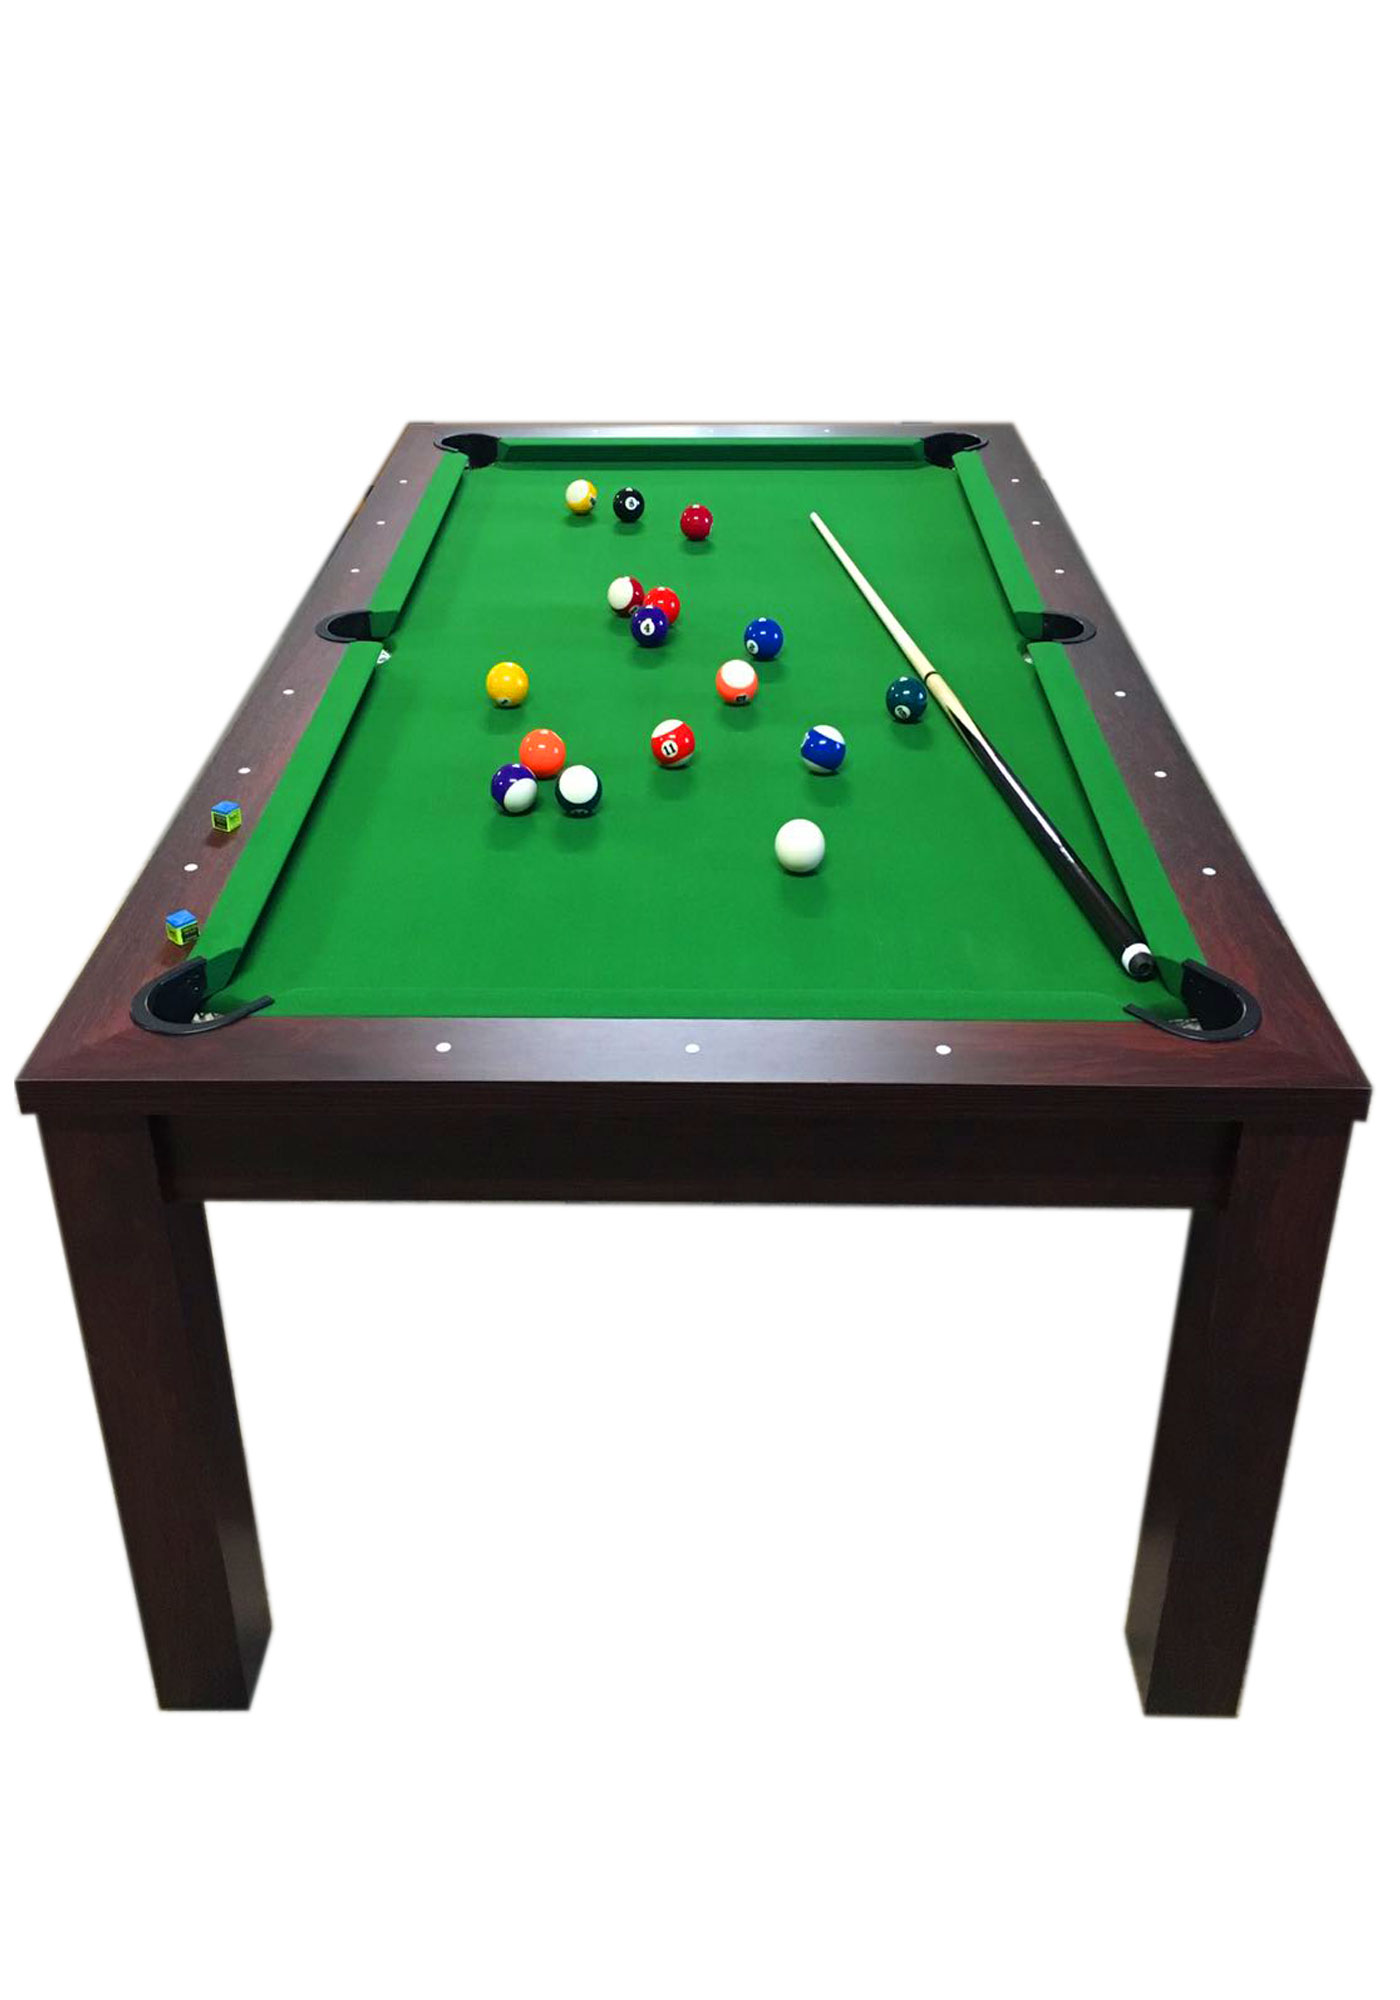 8ft 3-in-1 Multi Functional Billiard, Table Tennis and Dinning